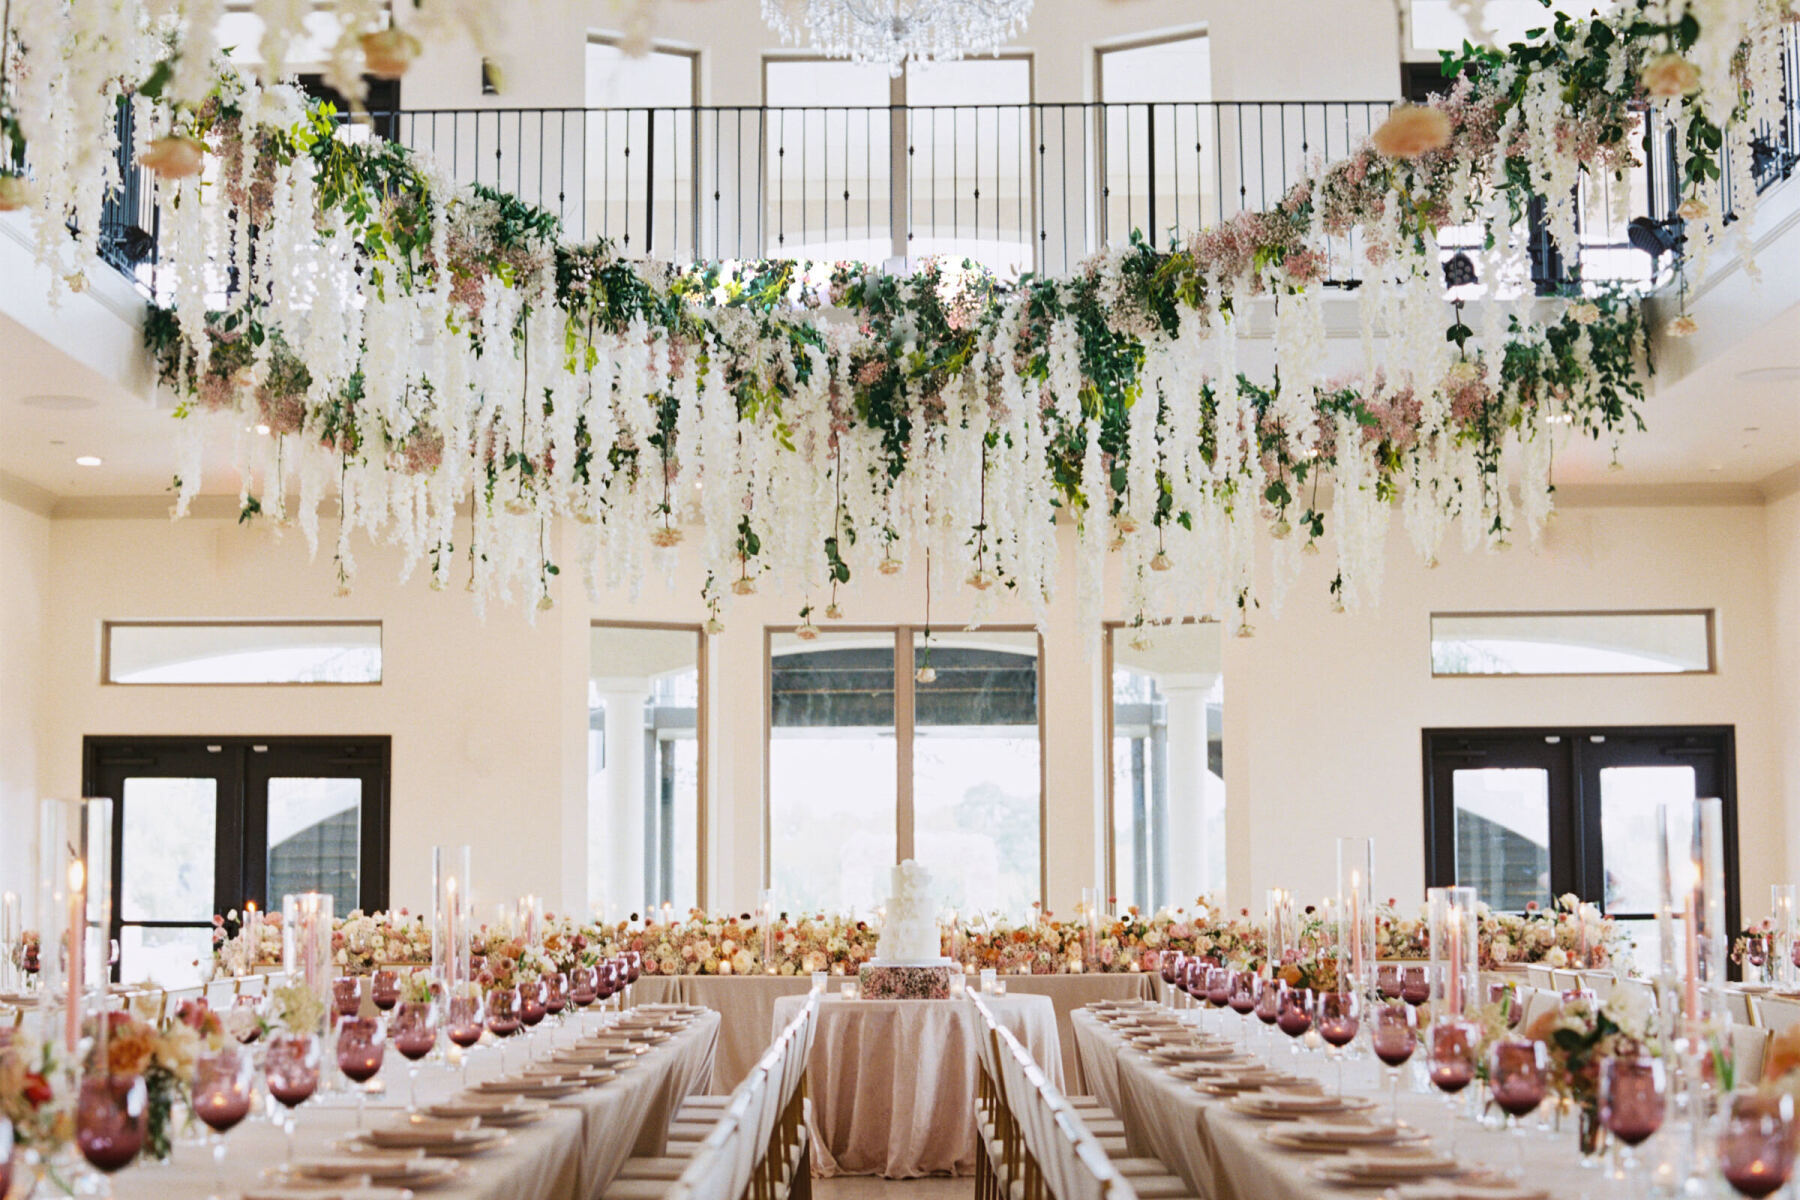 A modern fairytale wedding reception, with dripping flowers and greenery installed over a series of long reception tables decorated with plum glassware, pink taper candles, and lush centerpieces.